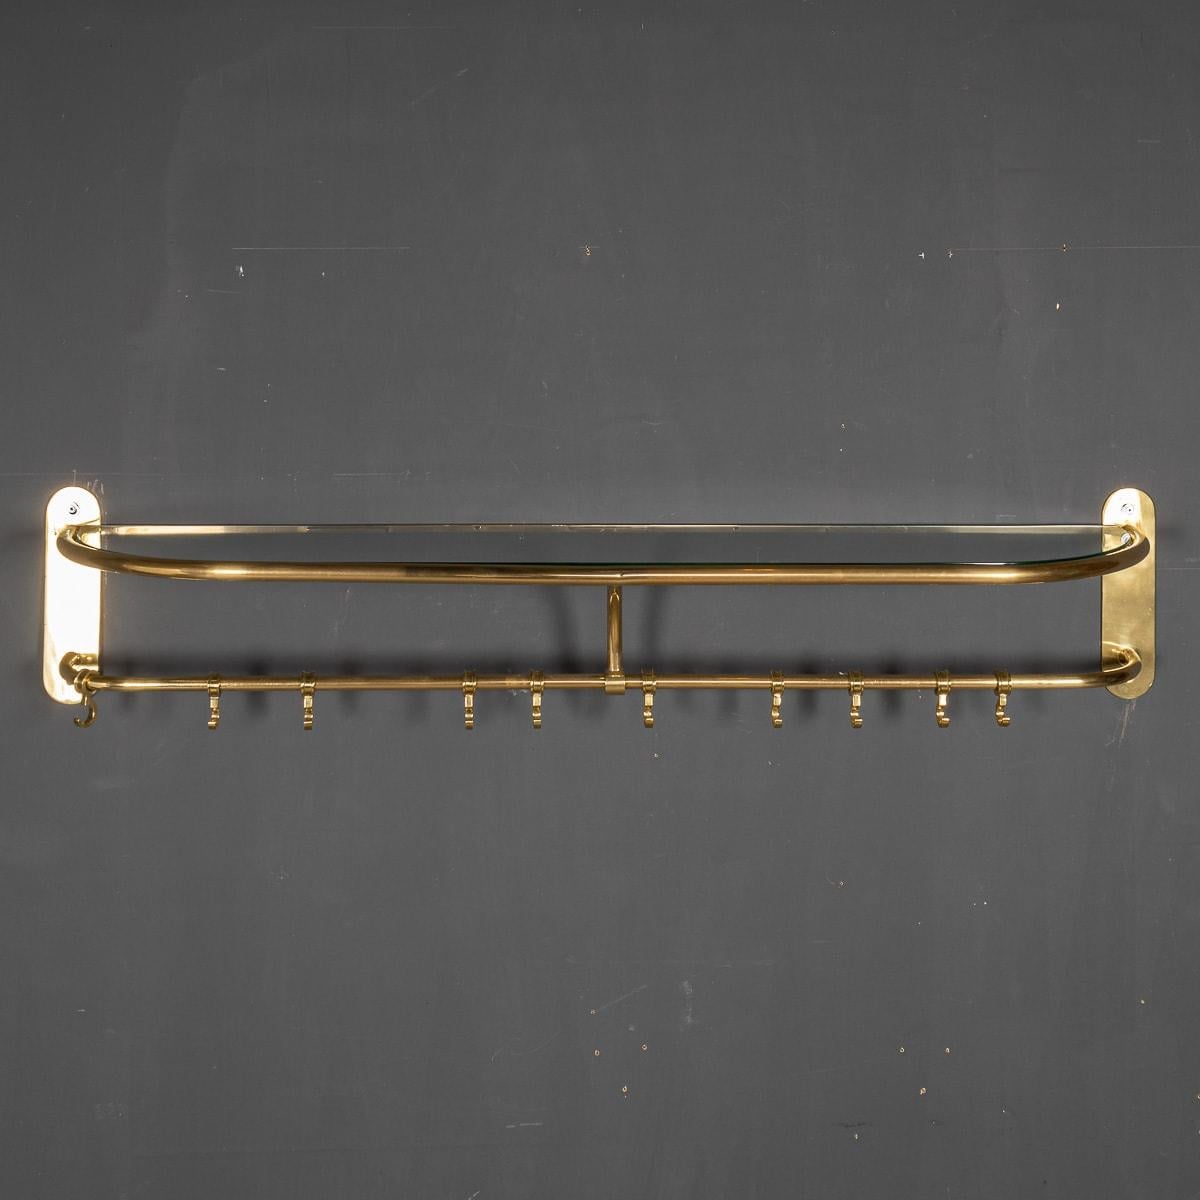 An unusual coat rack with brass rings to hang garments and a glass shelf for hats or accessories fabulous for a dressing room or hallway.

CONDITION
In Good Condition. (please refer to photographs)

SIZE
Height: 30cm
Width: 155cm
Depth: 30cm